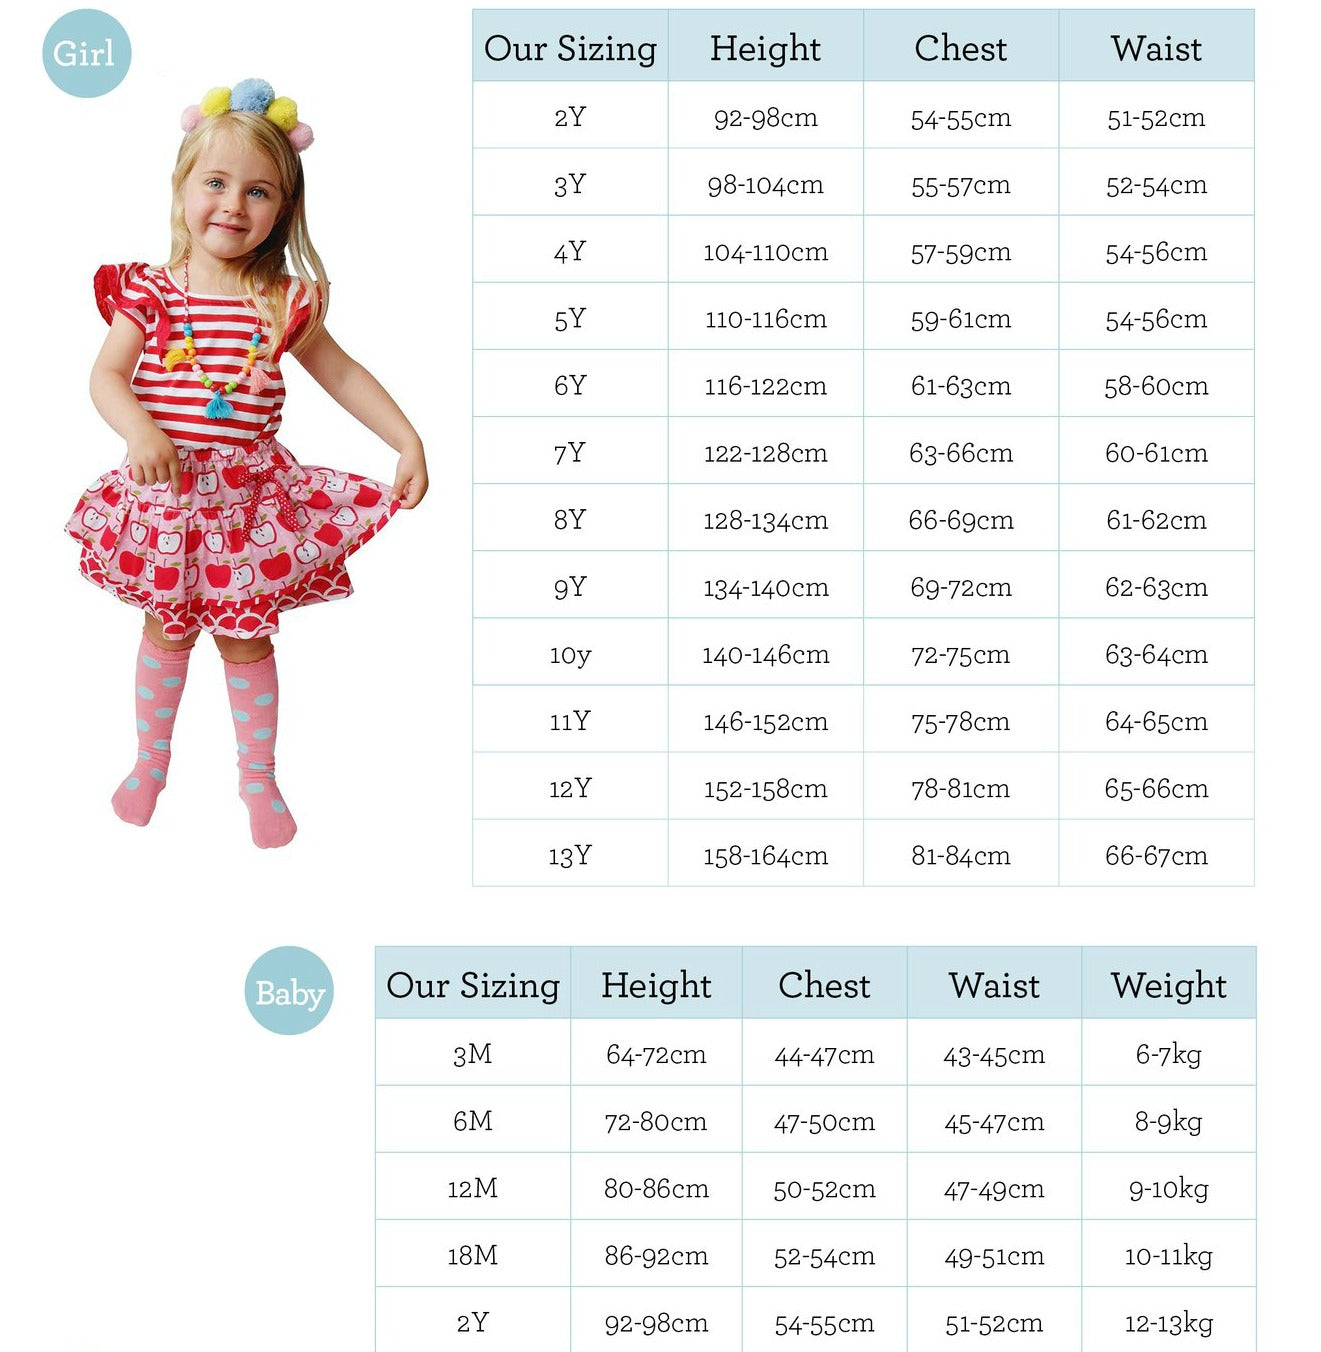 Size Guide & Care Instructions | Oobi Girls Kid Fashion